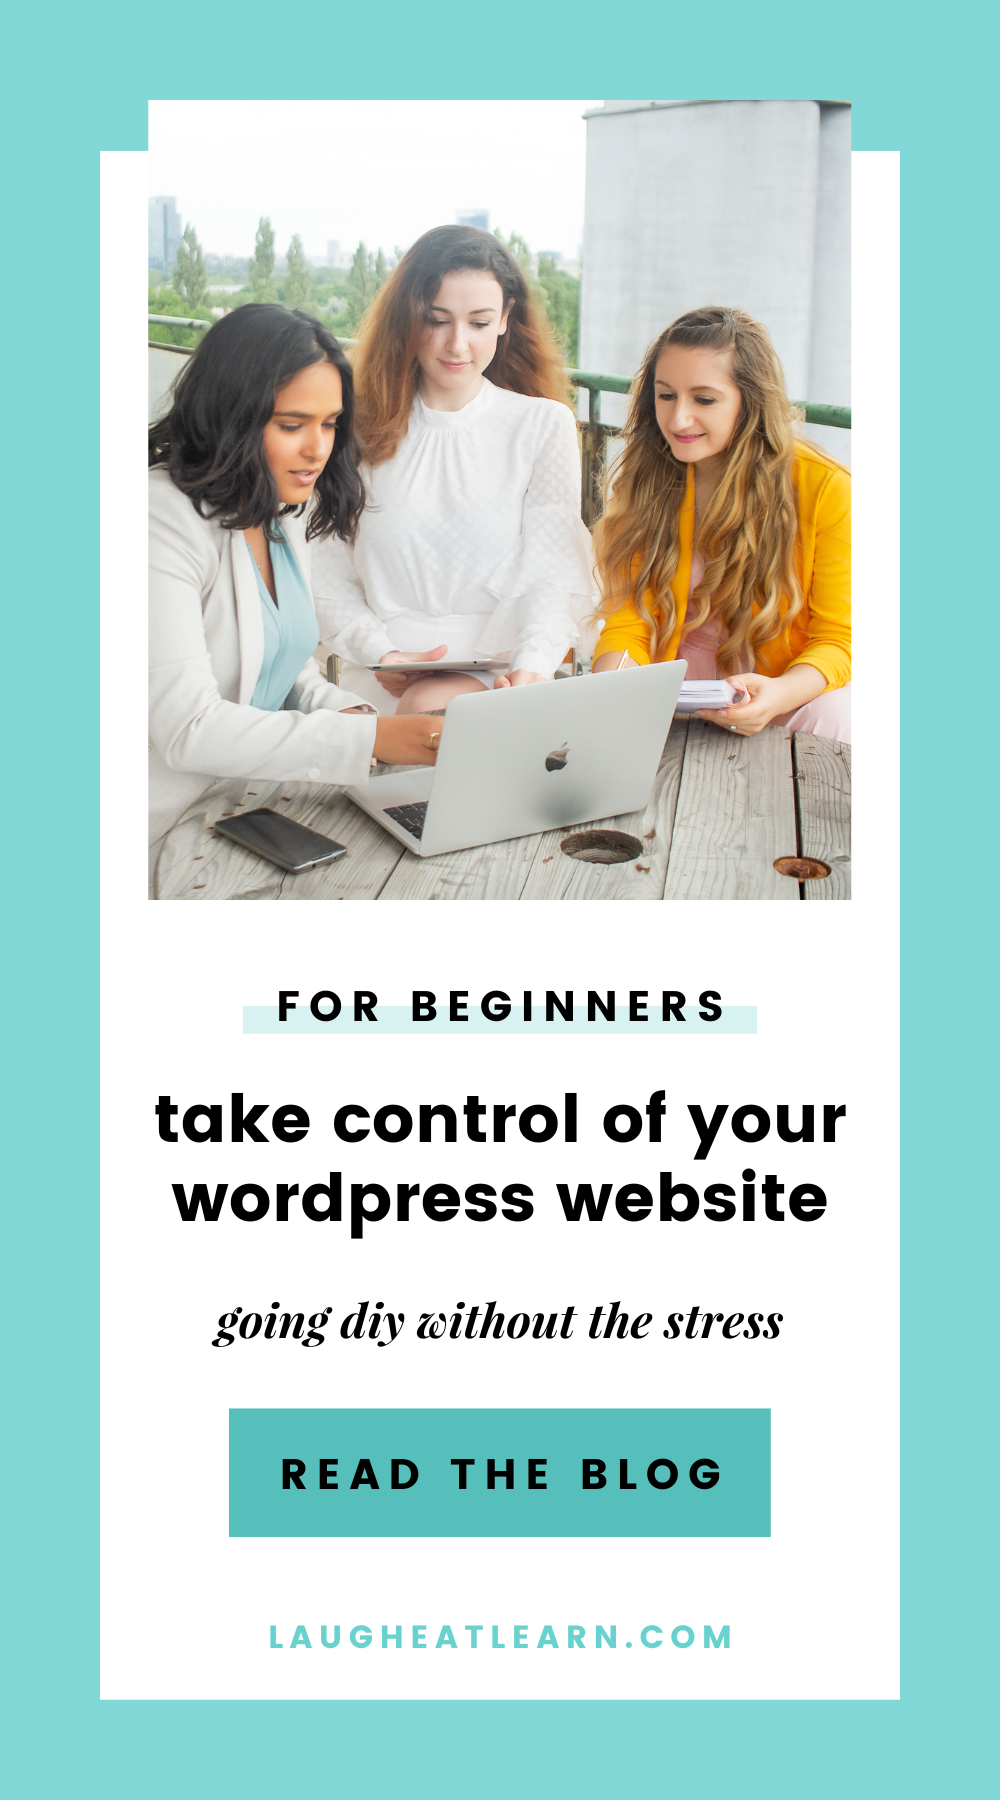 A brand spanking new website always sounds like a good idea, but when it’s time to take control of your website - you may be completely lost. Which is exactly why I created the ultimate WordPress guide for beginners.